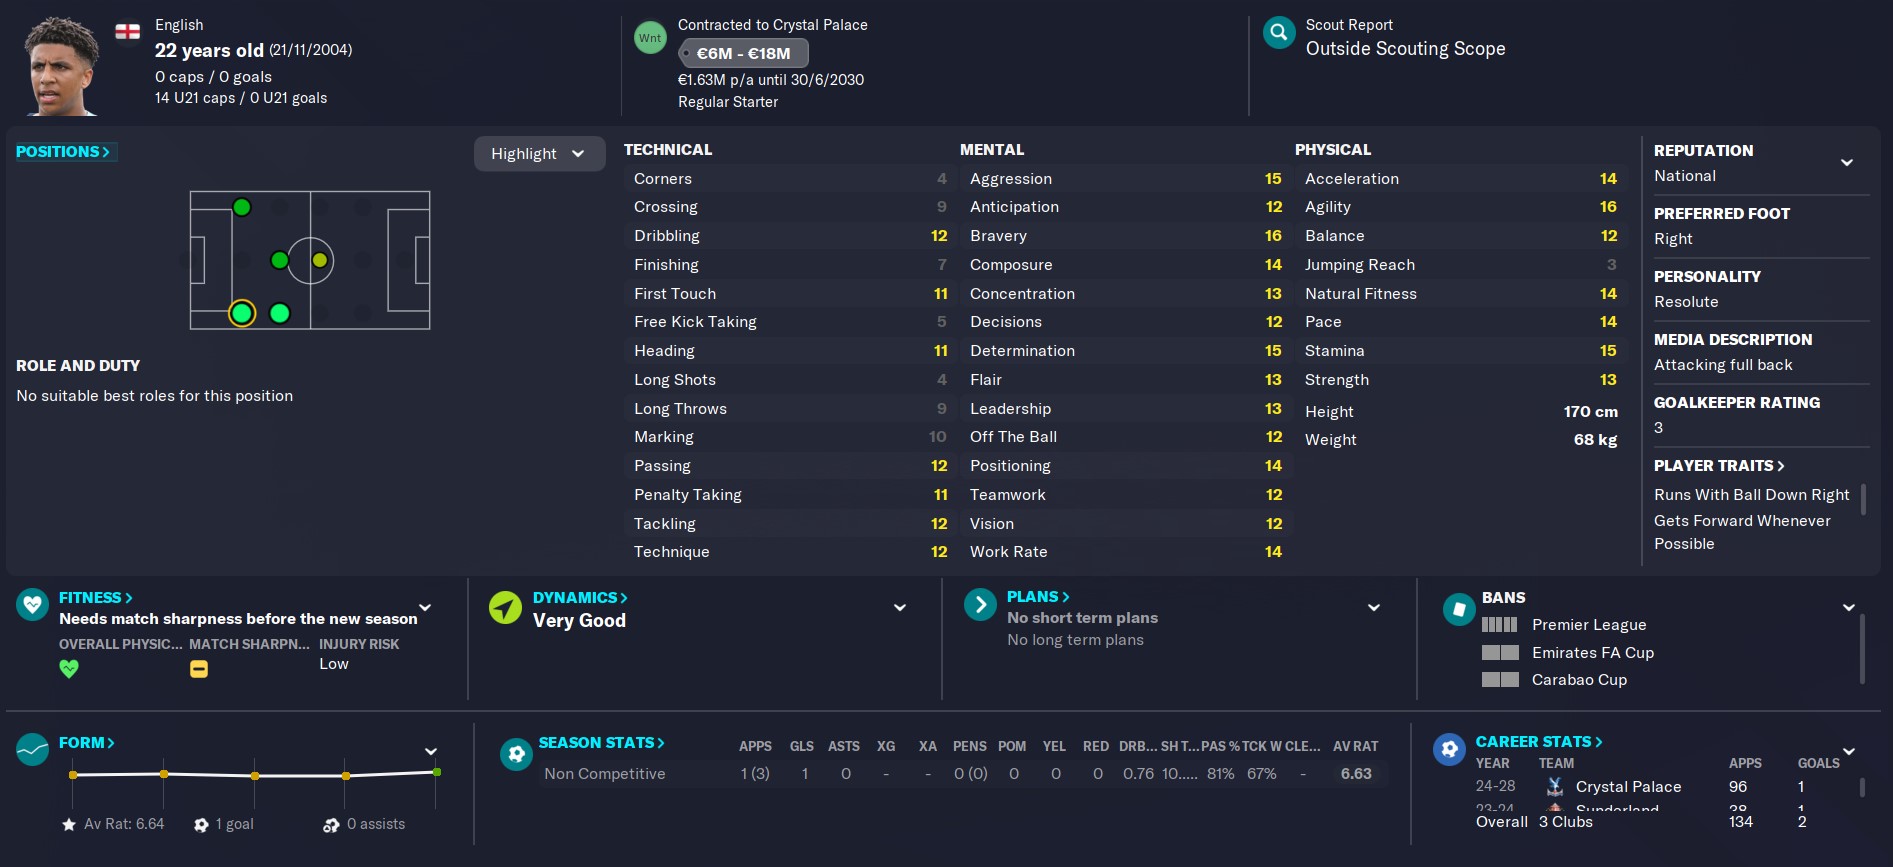 Wonderkid Rico Lewis FM 2023 profile aged 22 in the year 2027